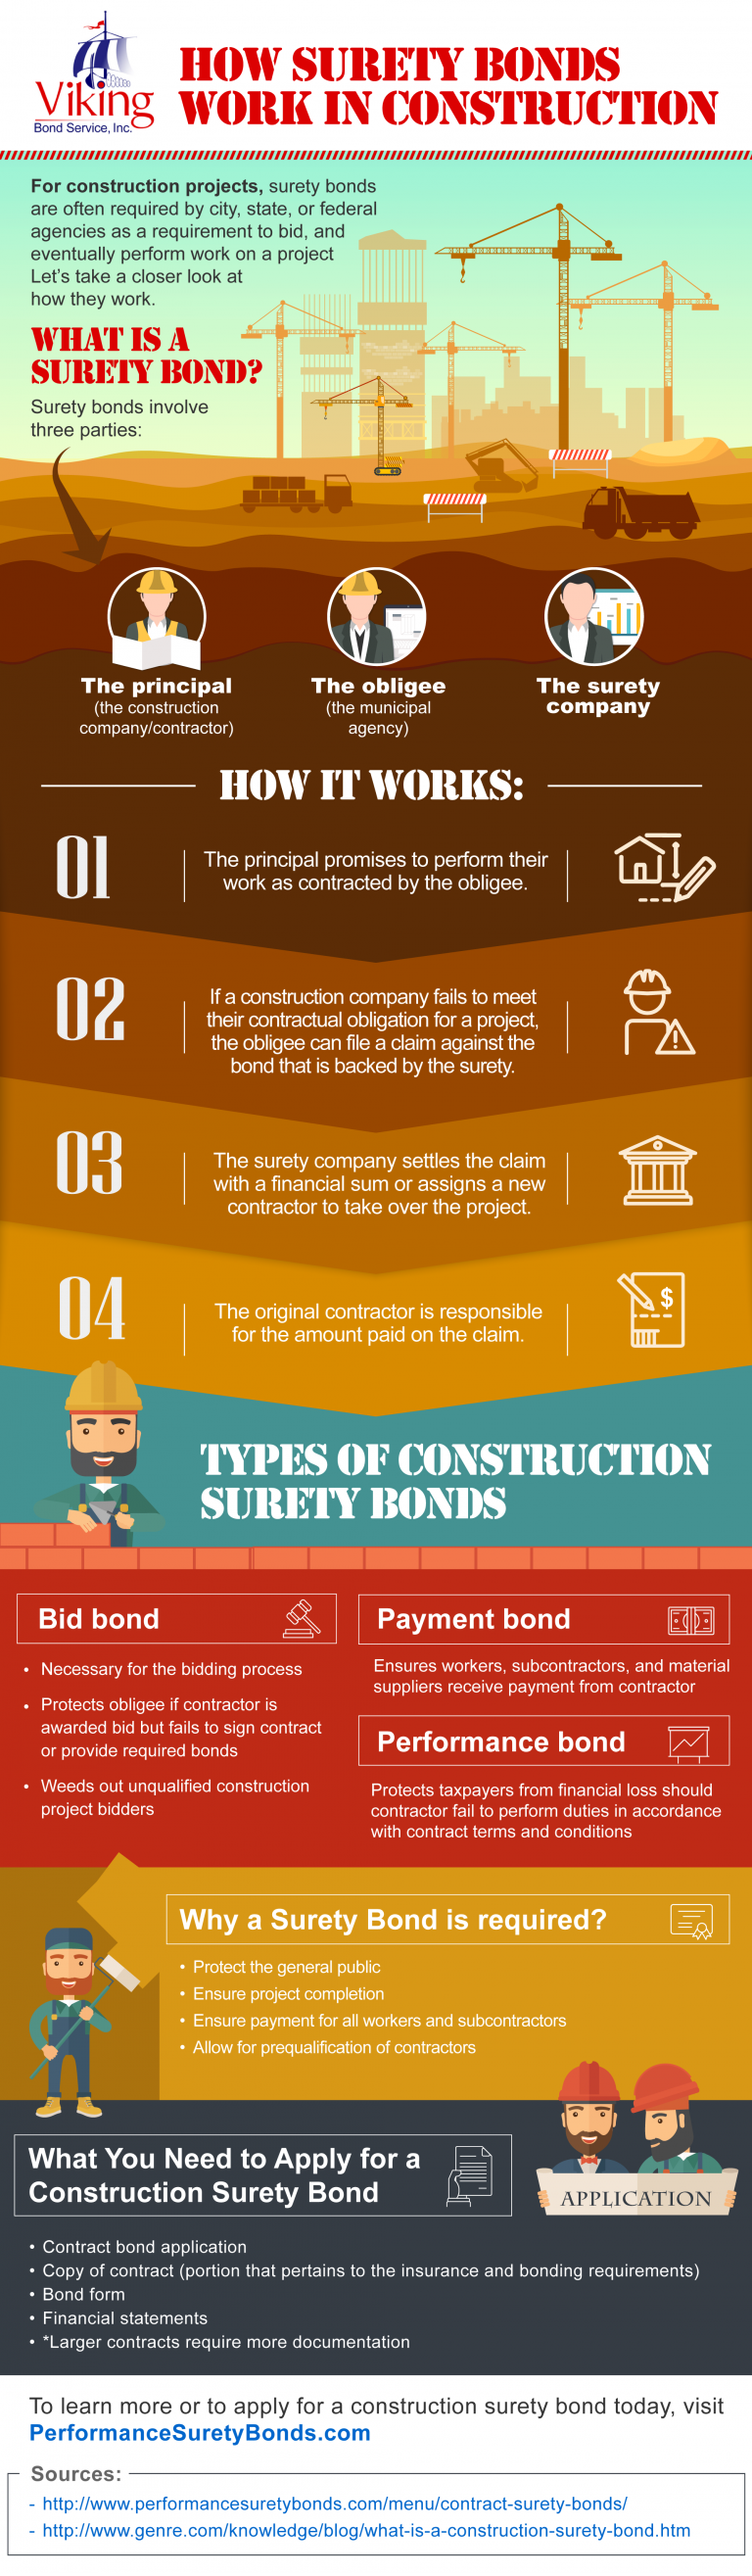 How Surety Bonds Work In Construction [infographic]